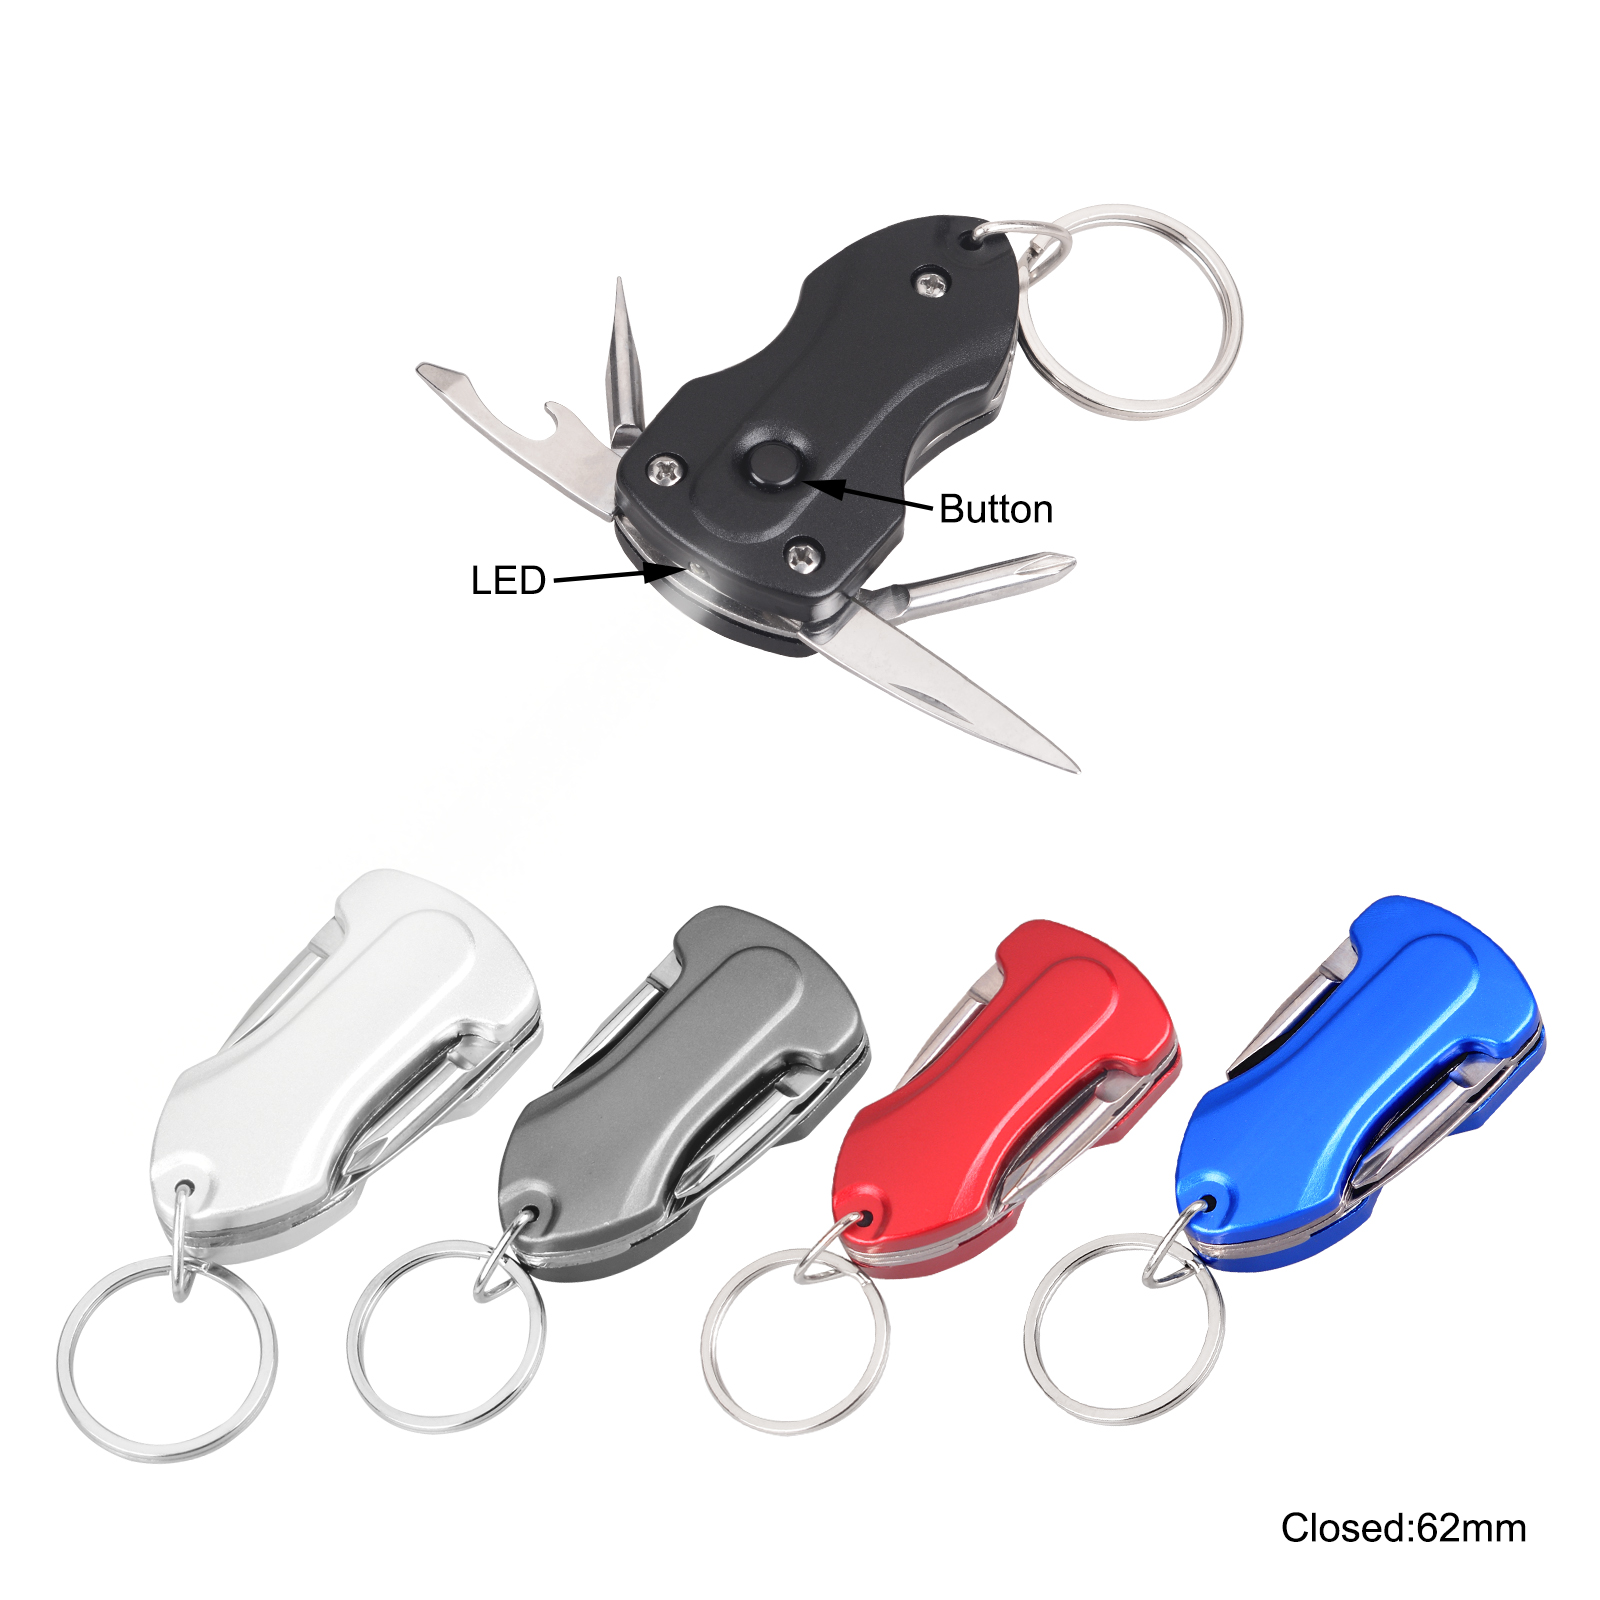 #6301 Multi Function Key Chain Tools with LED Torch 